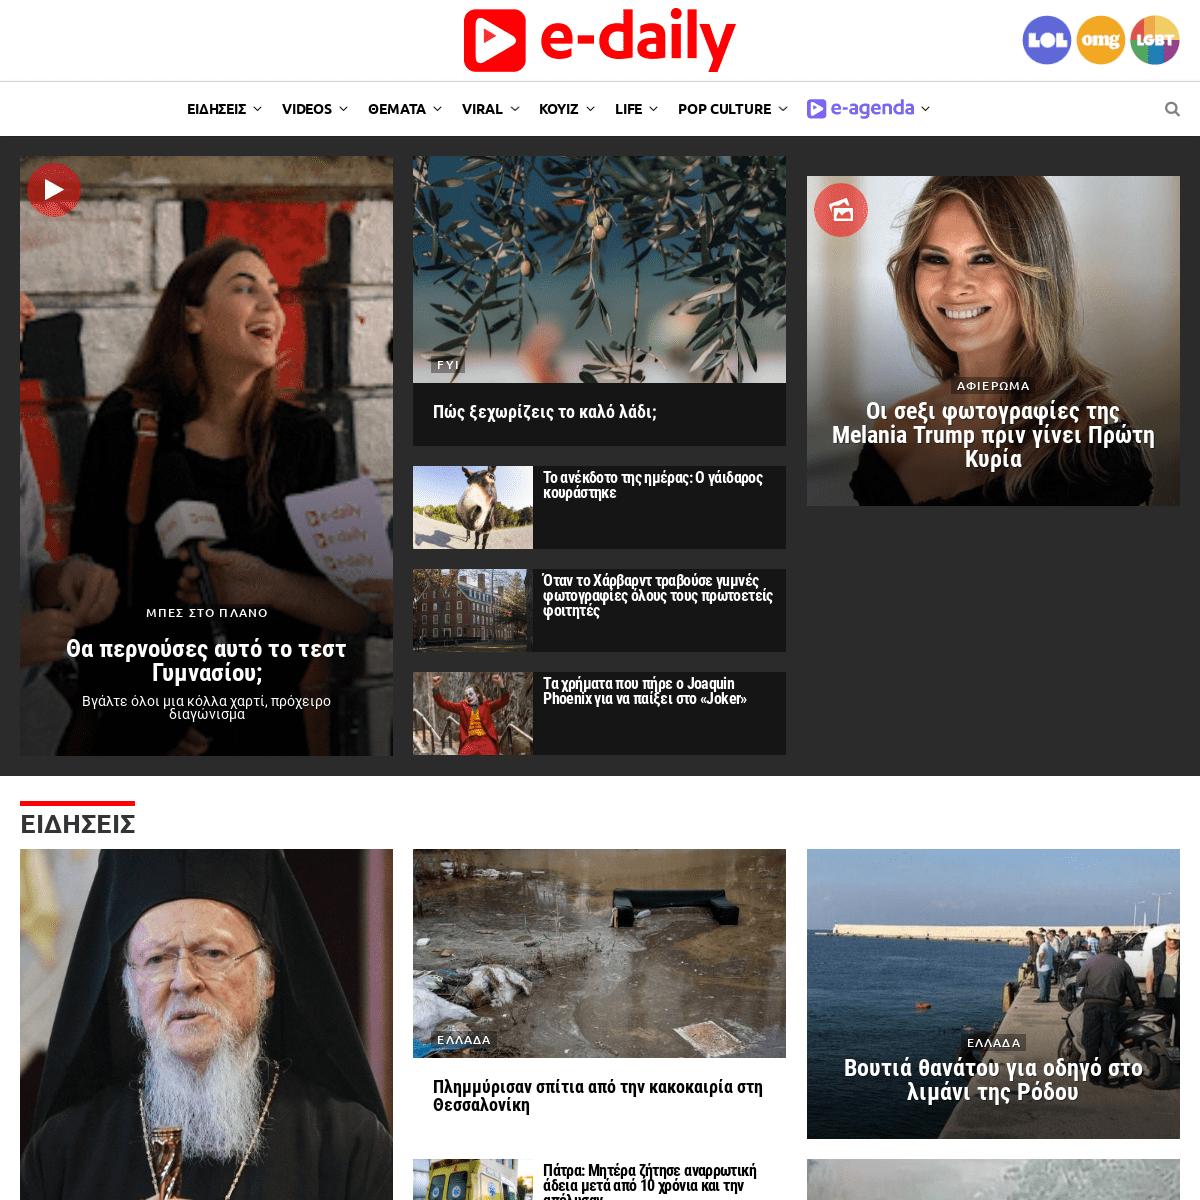 A complete backup of e-daily.gr